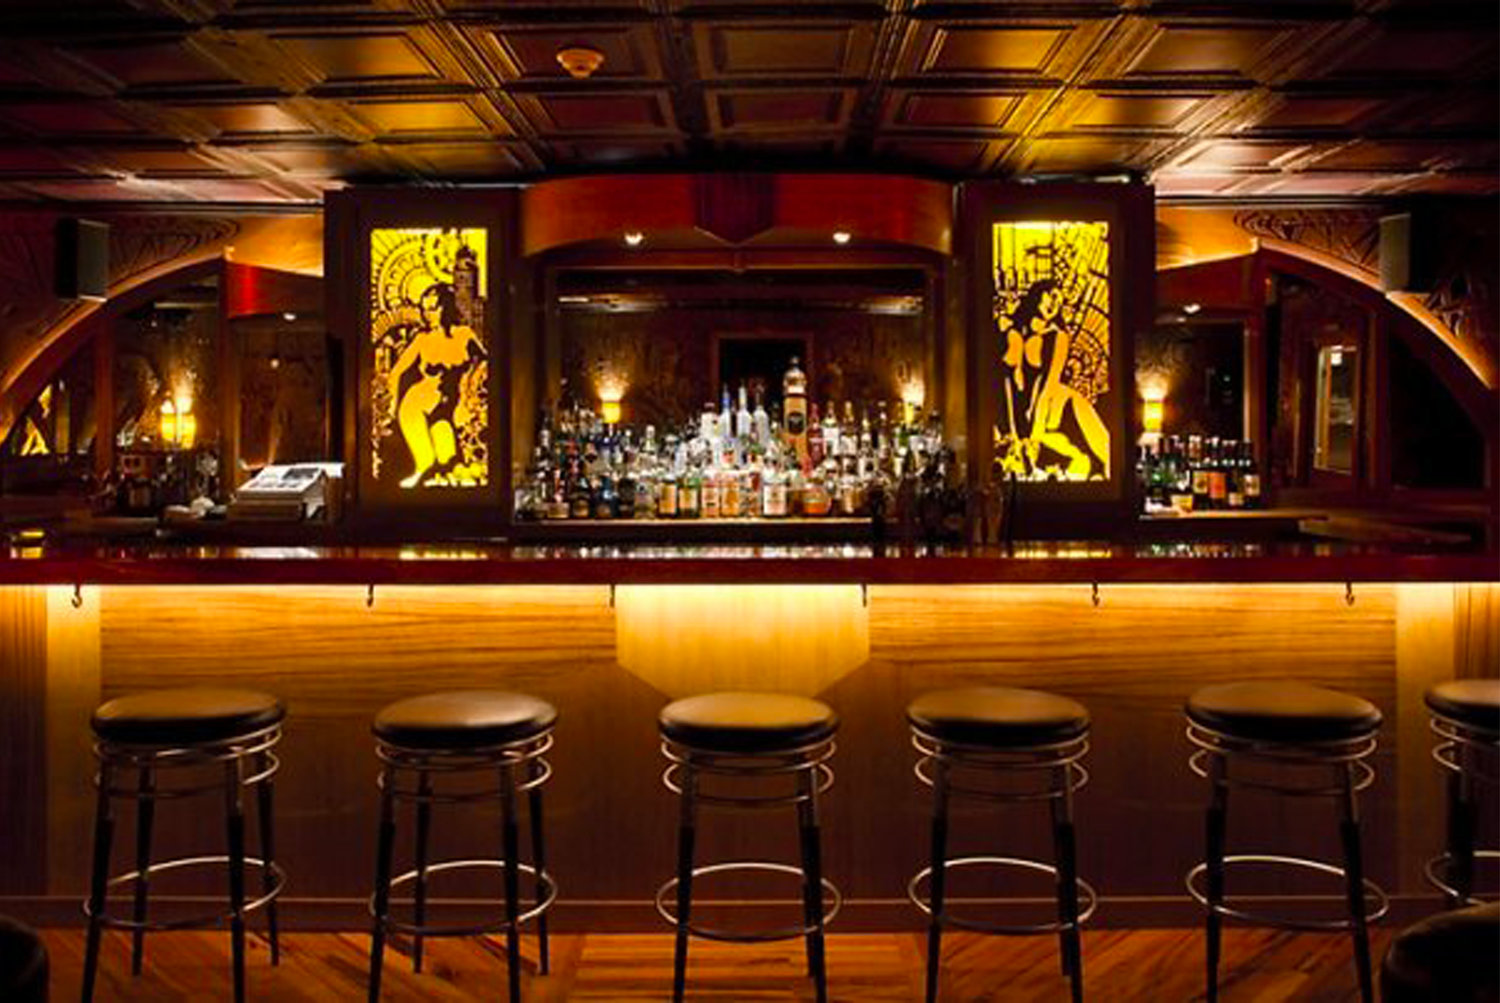 While currently closed, The Avery’s signature bar will be patiently waiting for the return of indoor customers